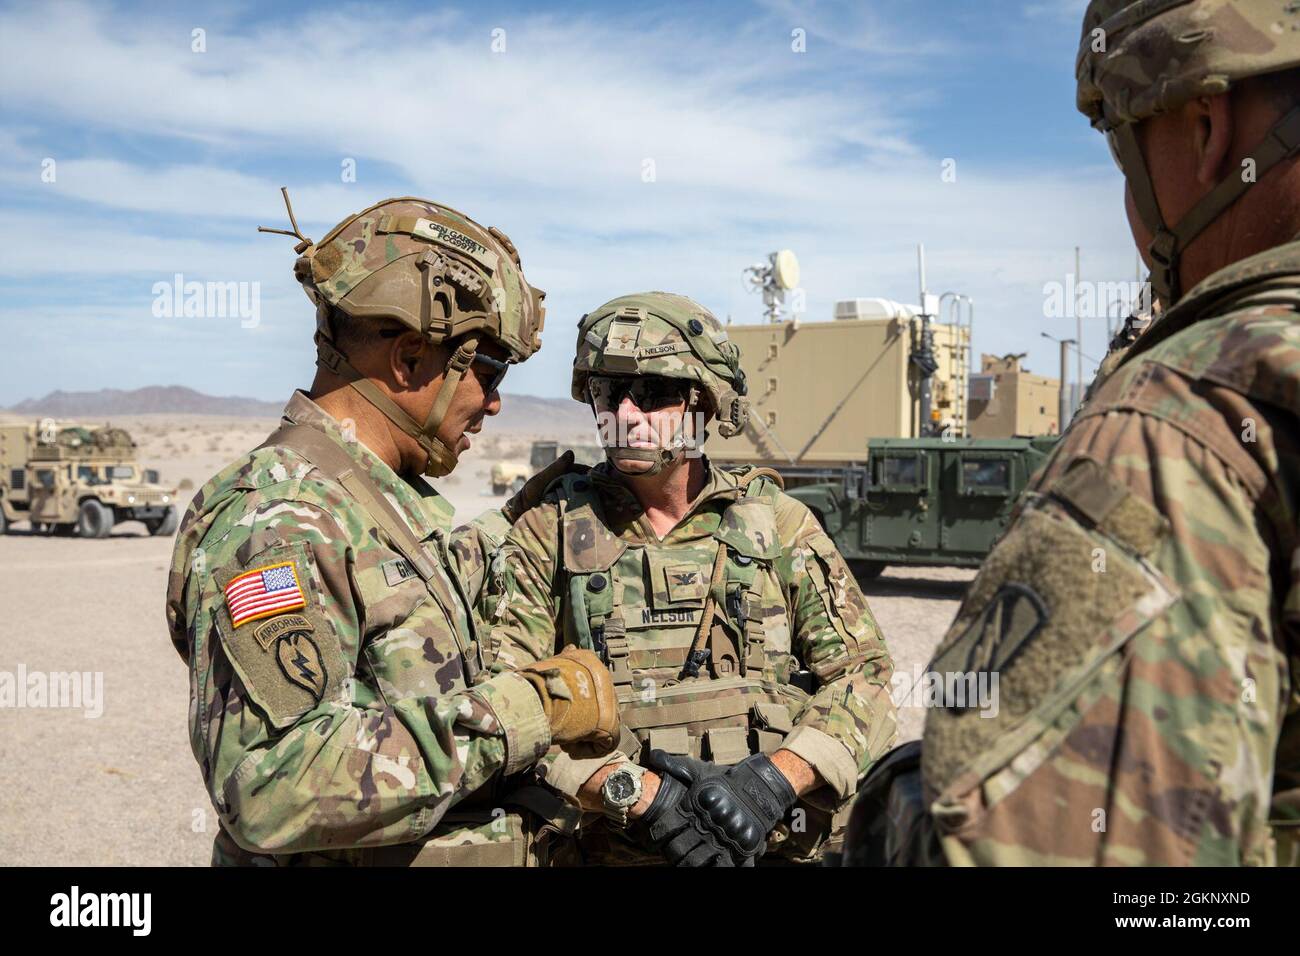 Gen. Michael Garrett, commanding general, United States Army Forces Command, converses with Col. Jason P. Nelson, the 155th Armored Brigade Combat Team commander, Mississippi Army National Guard, at the National Training Center, Fort Irwin, California, June 9, 2021. The purpose of Garrett’s visit is to observe and engage with leaders and Soldiers with the 155th ABCT during their rotational training. Stock Photo